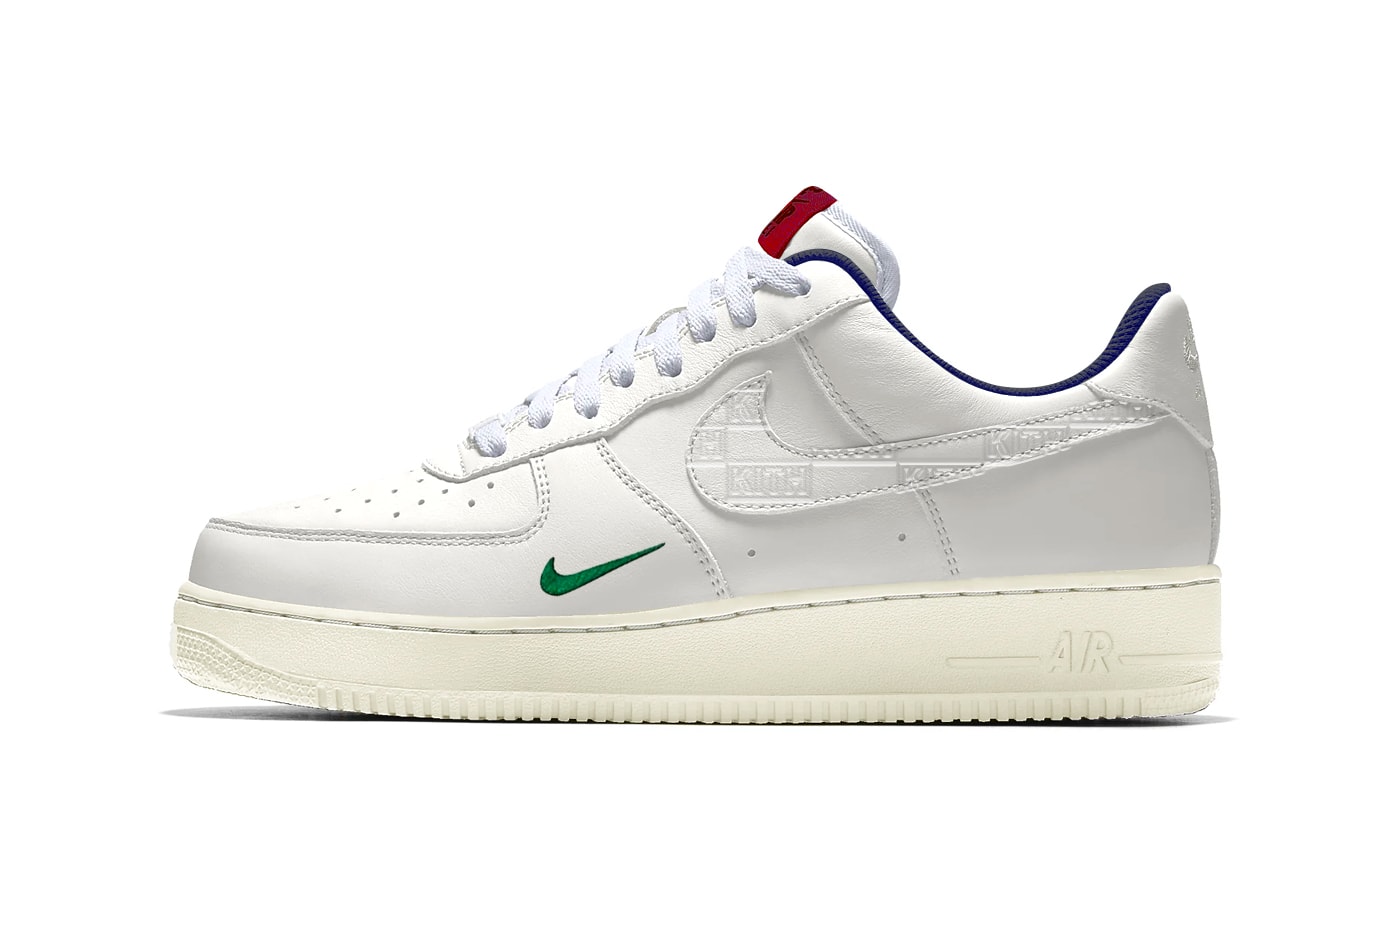 KITH Nike Air Force 1 Low Another Look Ronnie Fieg White Release Info Date Buy Price